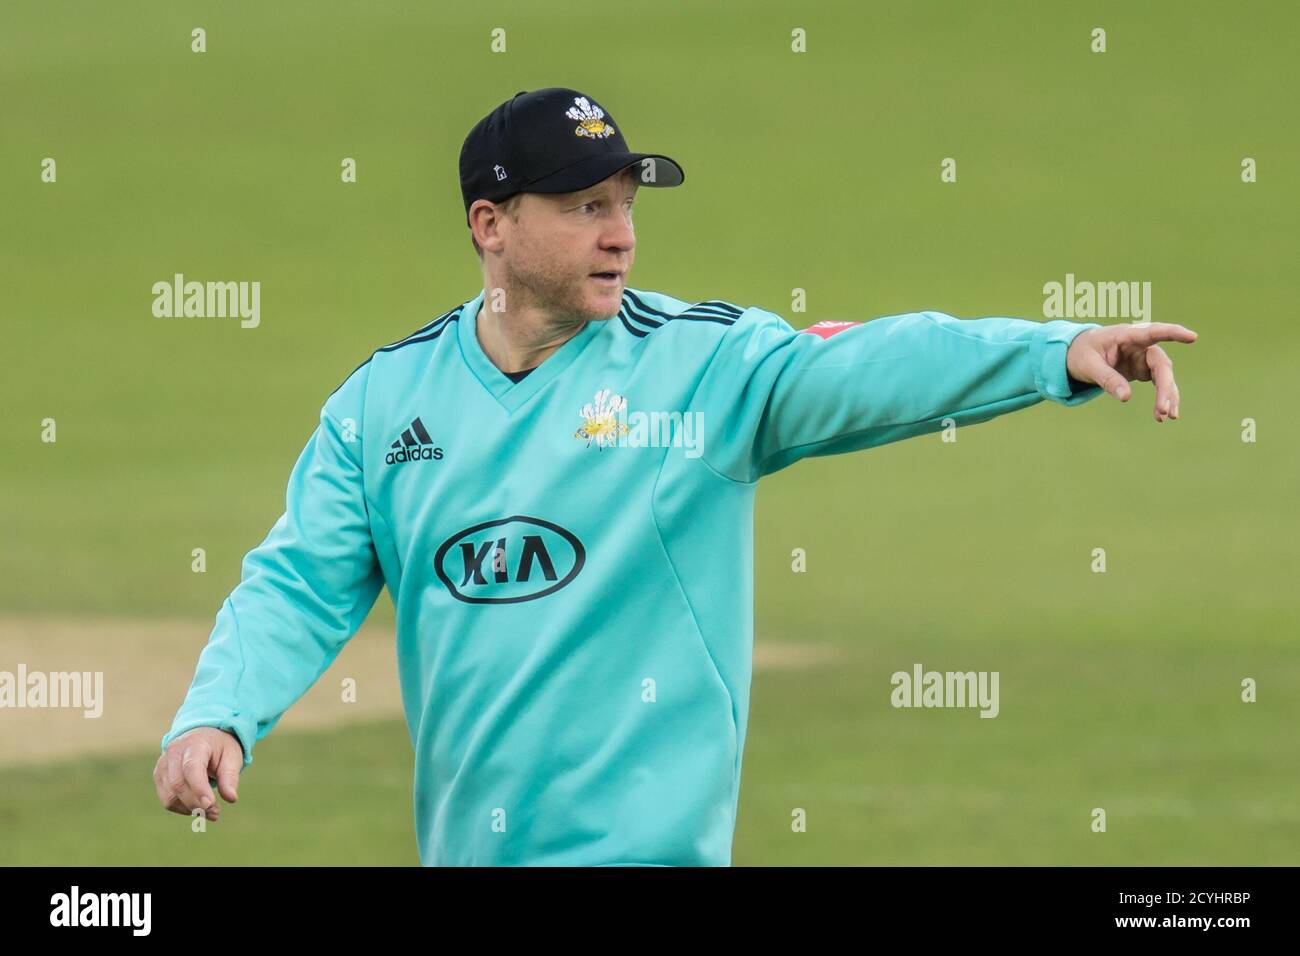 London, UK. 1 October, 2020. Surrey captain Gareth Batty  as they take on Kent in the Vitality T20 Blast Quarter-Final match at the Kia Oval. The match was played in an empty stadium due to Covid-19 restrictions. David Rowe/Alamy Live News Stock Photo